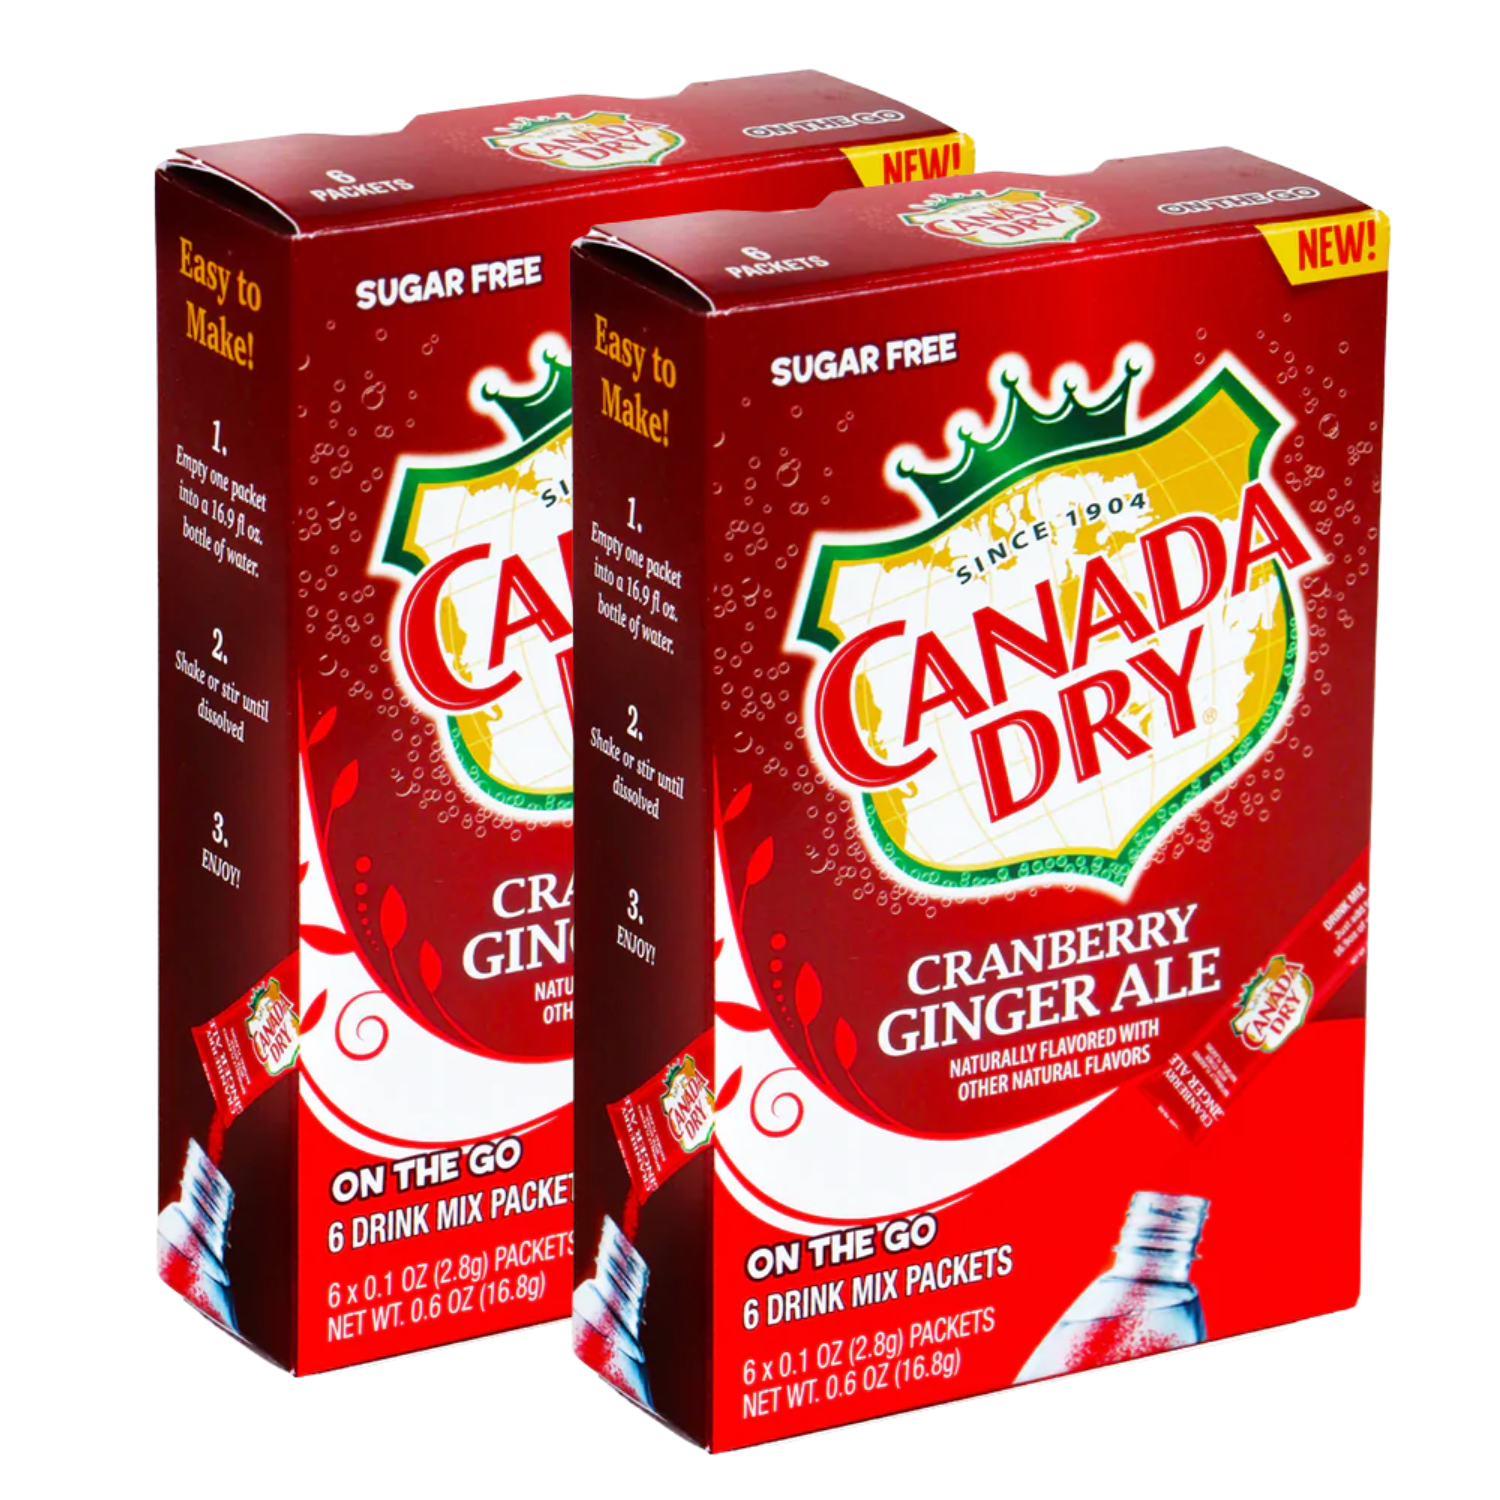 NS Canada Dry Cranberry Ginger Ale Singles To Go Drink Mix, Sugar